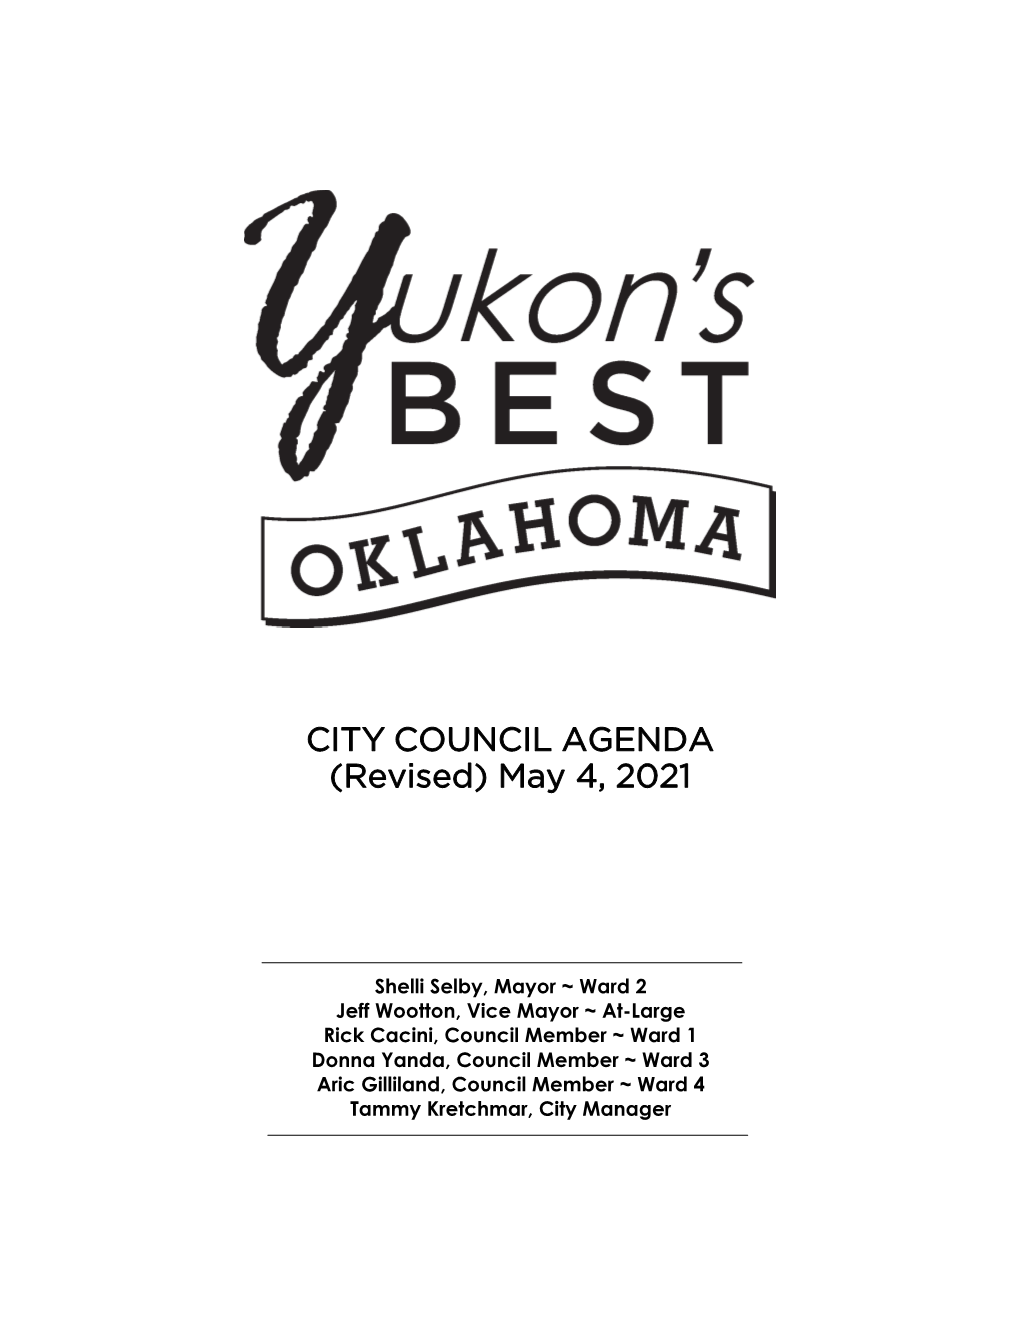 CITY COUNCIL AGENDA (Revised) May 4, 2021